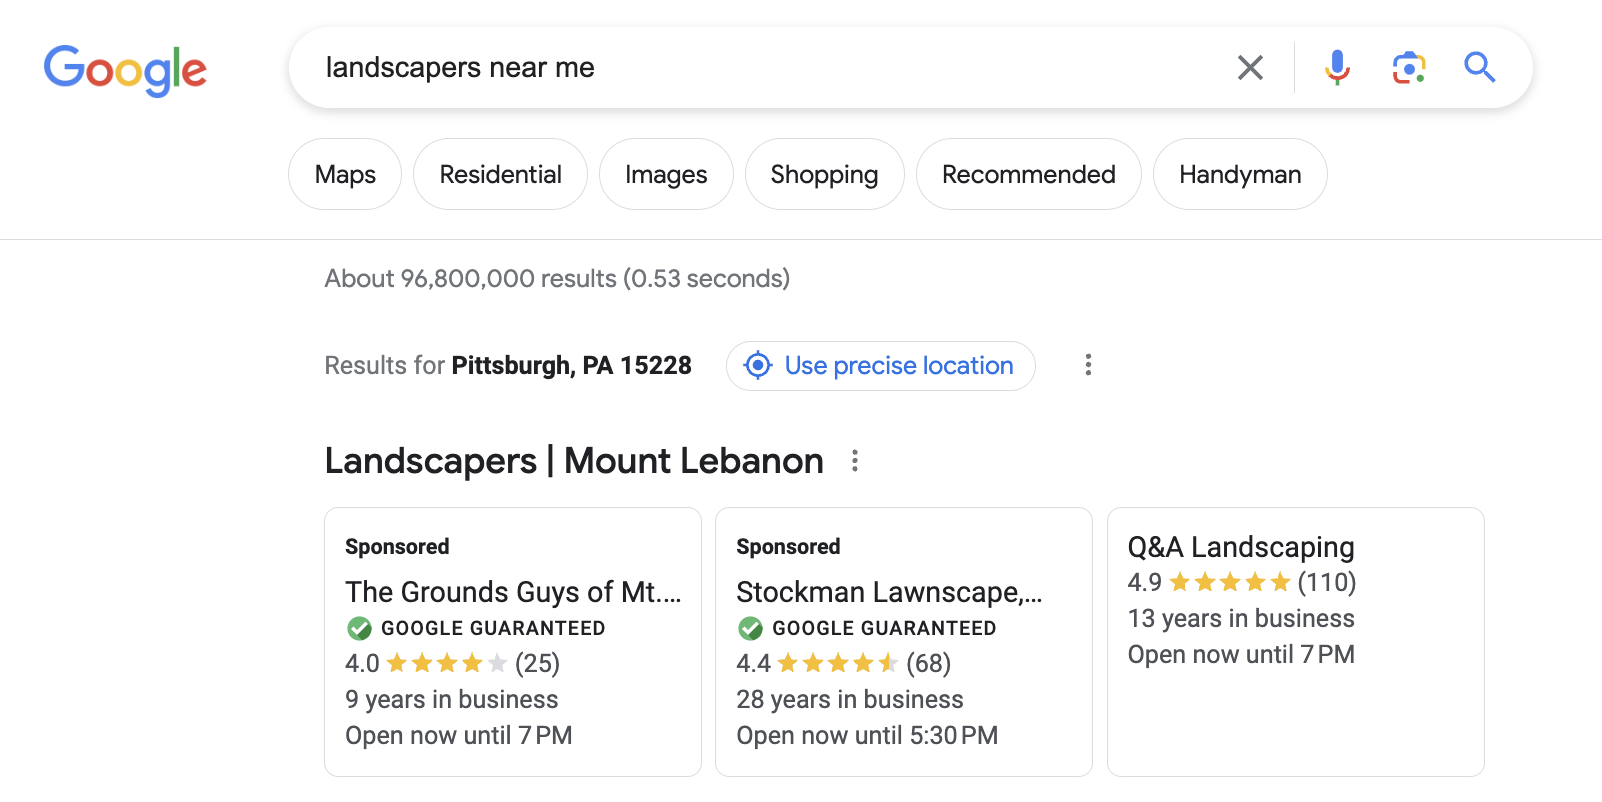 Google Local Service Ads for Landscapers